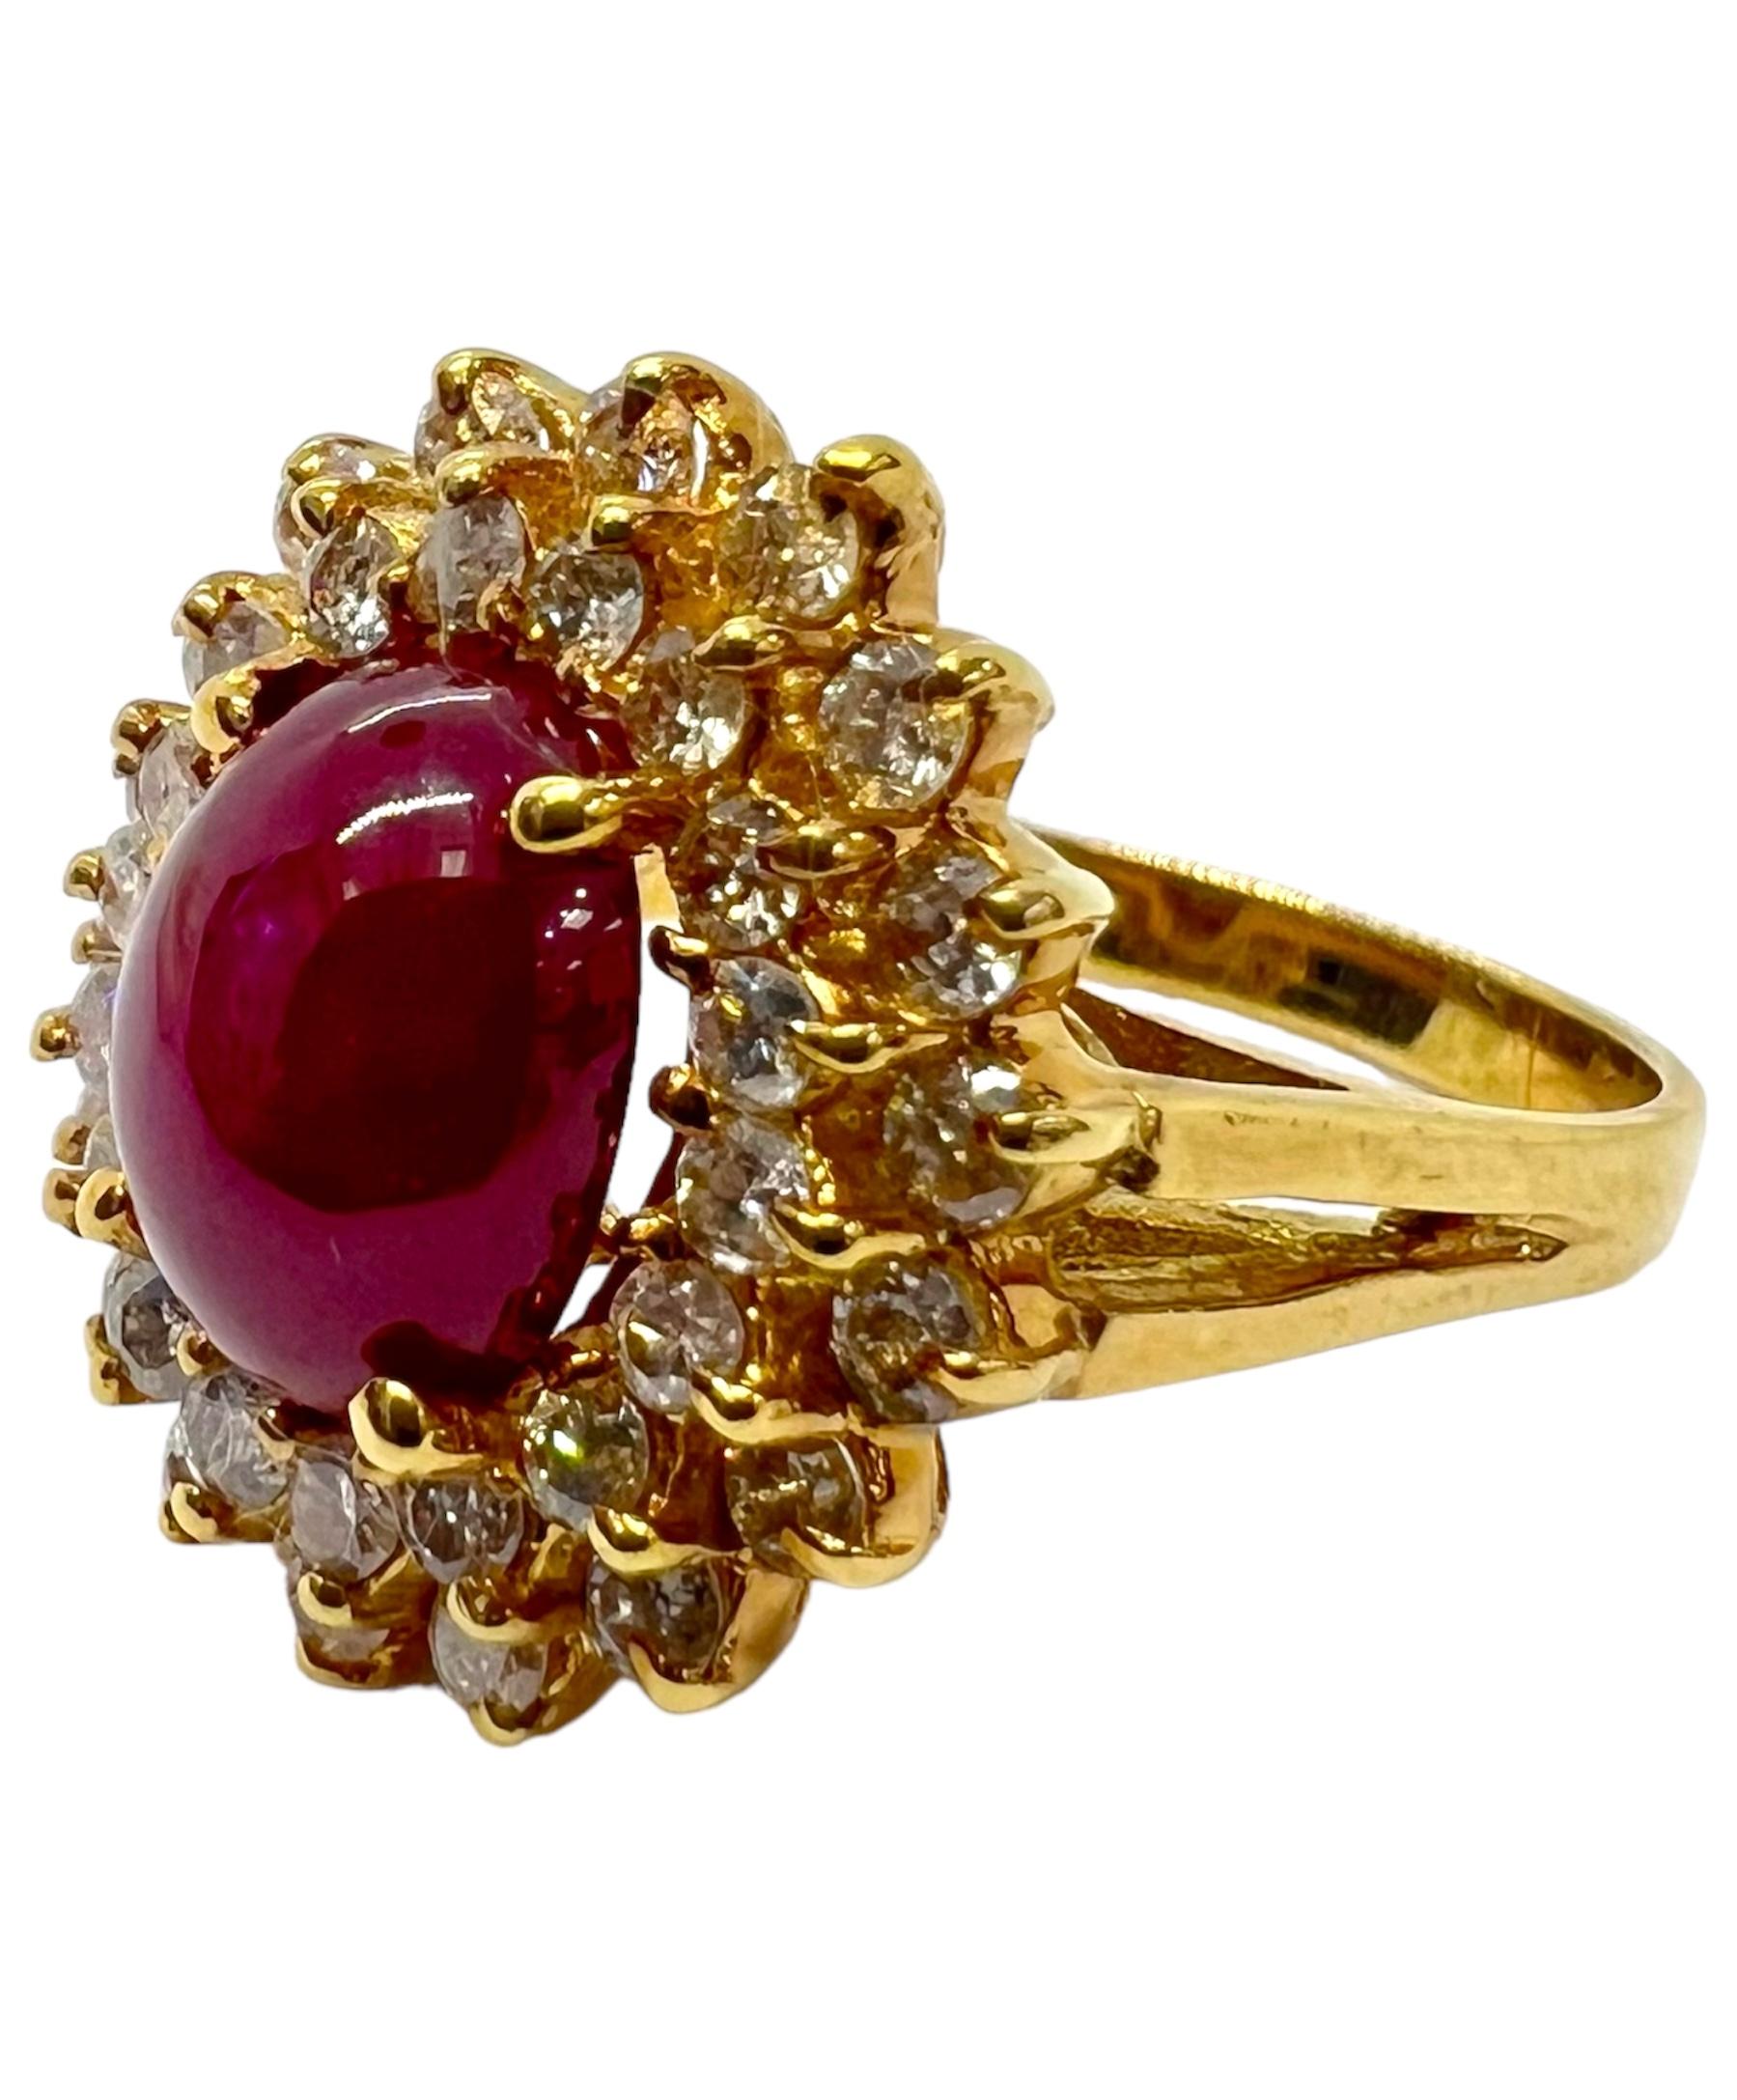 14K yellow gold ring with cabochon ruby center stone and accentuated with diamonds.

Sophia D by Joseph Dardashti LTD has been known worldwide for 35 years and are inspired by classic Art Deco design that merges with modern manufacturing techniques.